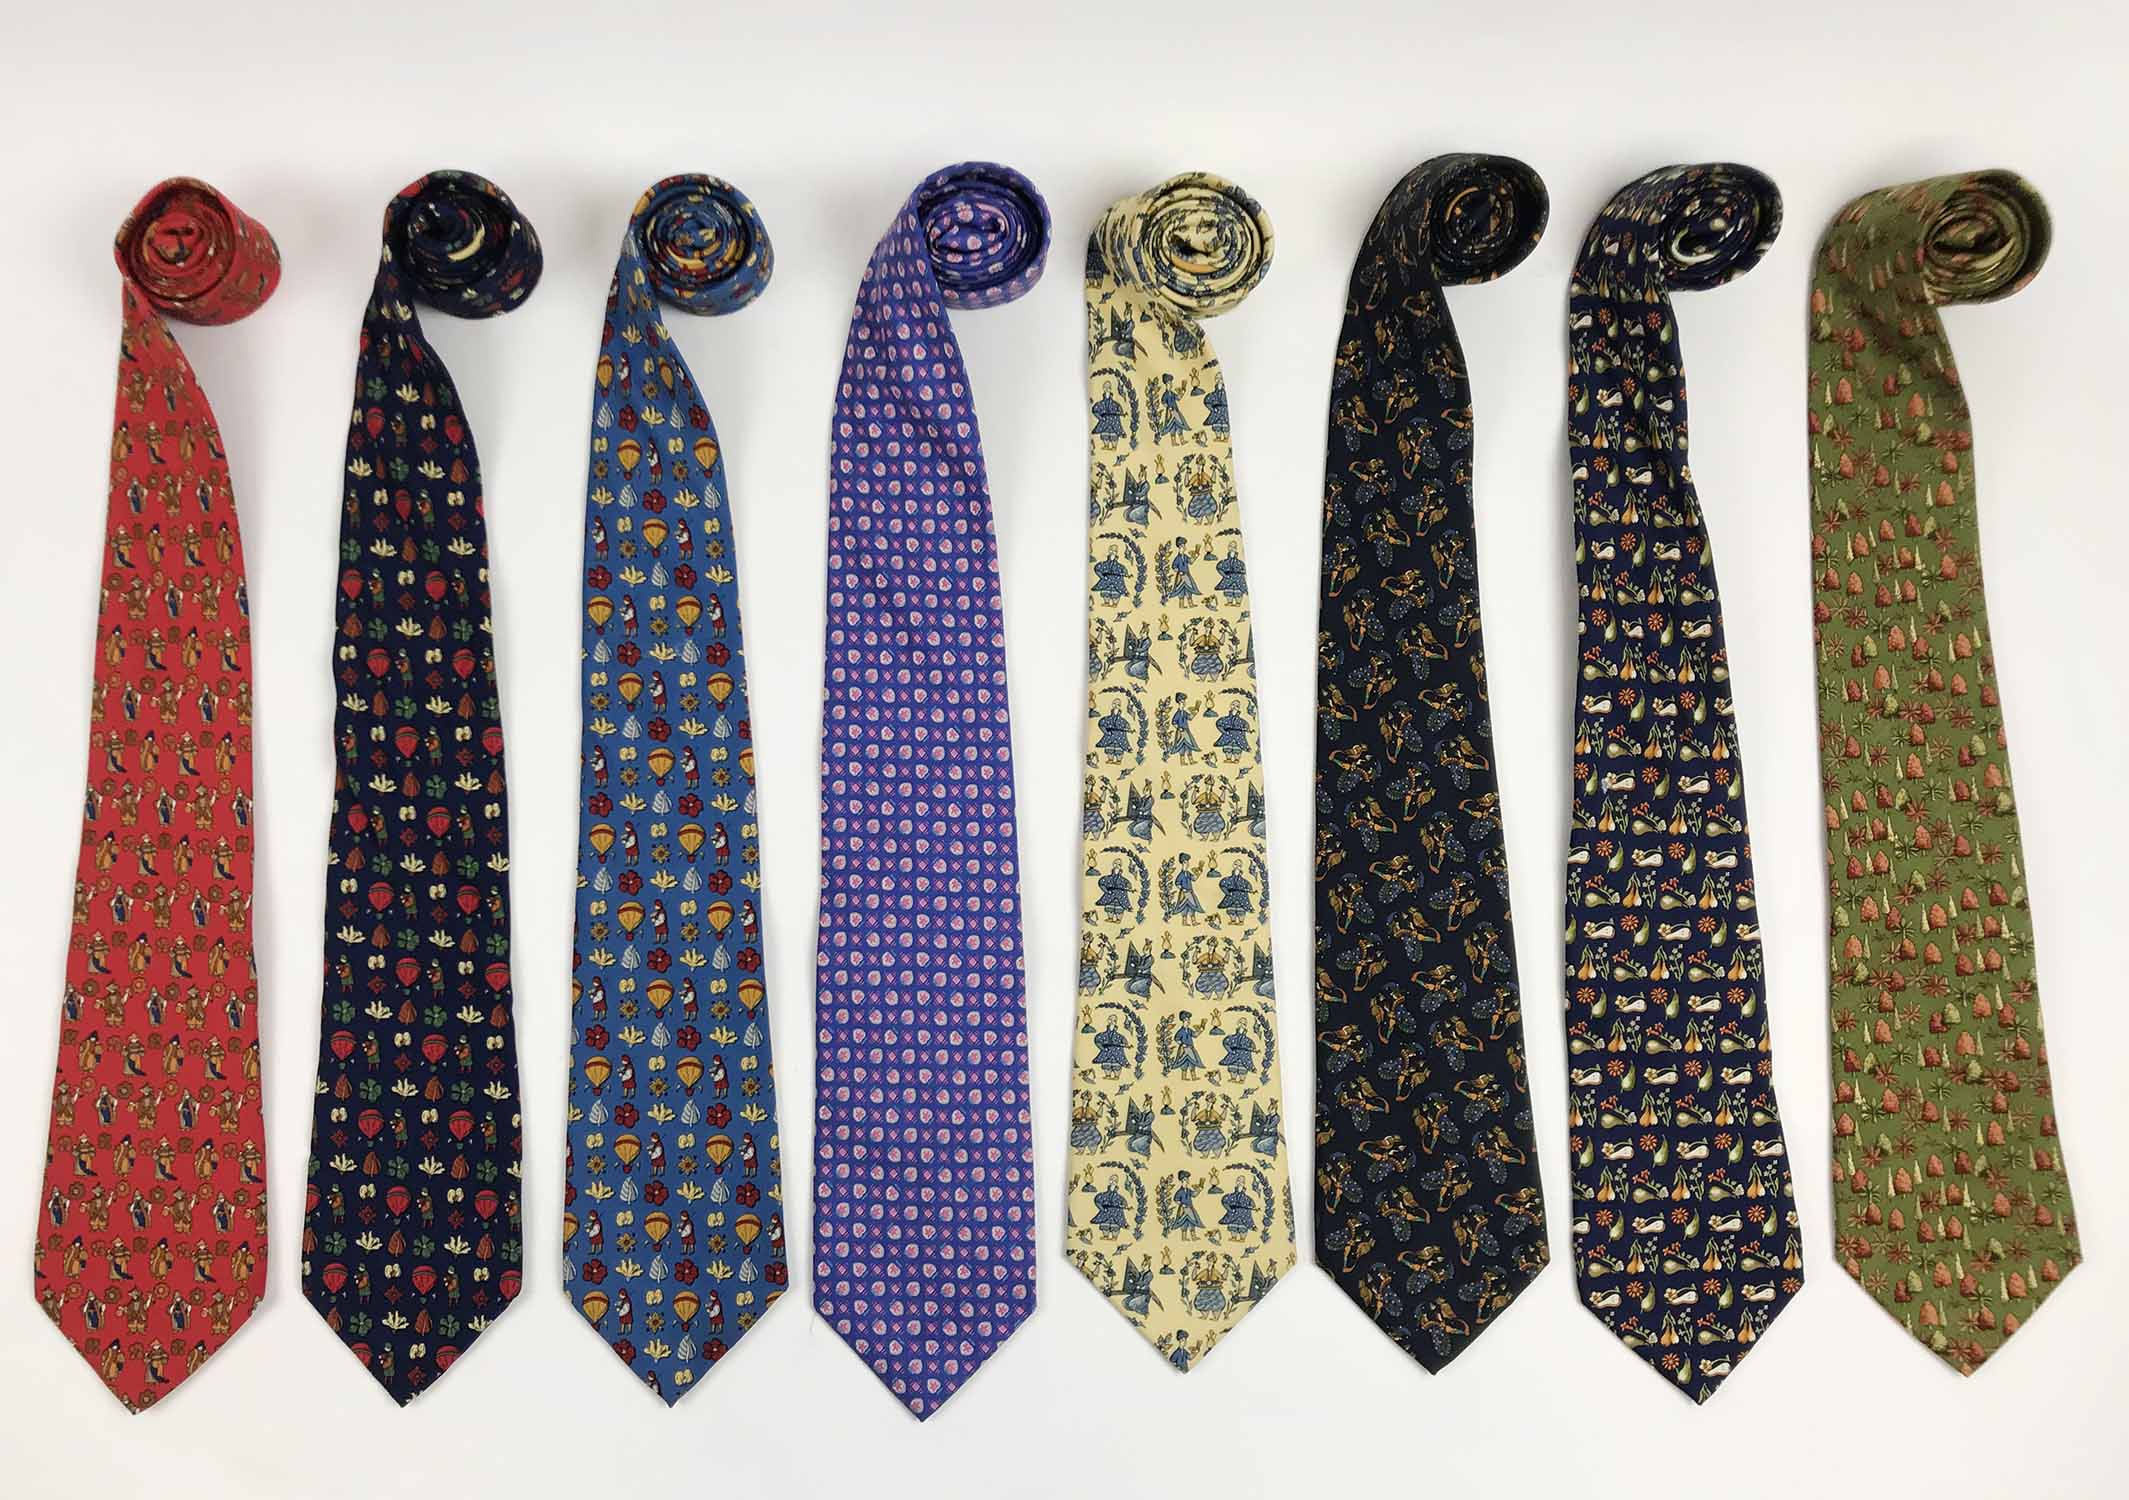 FERRAGAMO TIES, a collection of eight patterned silk ties. (8)